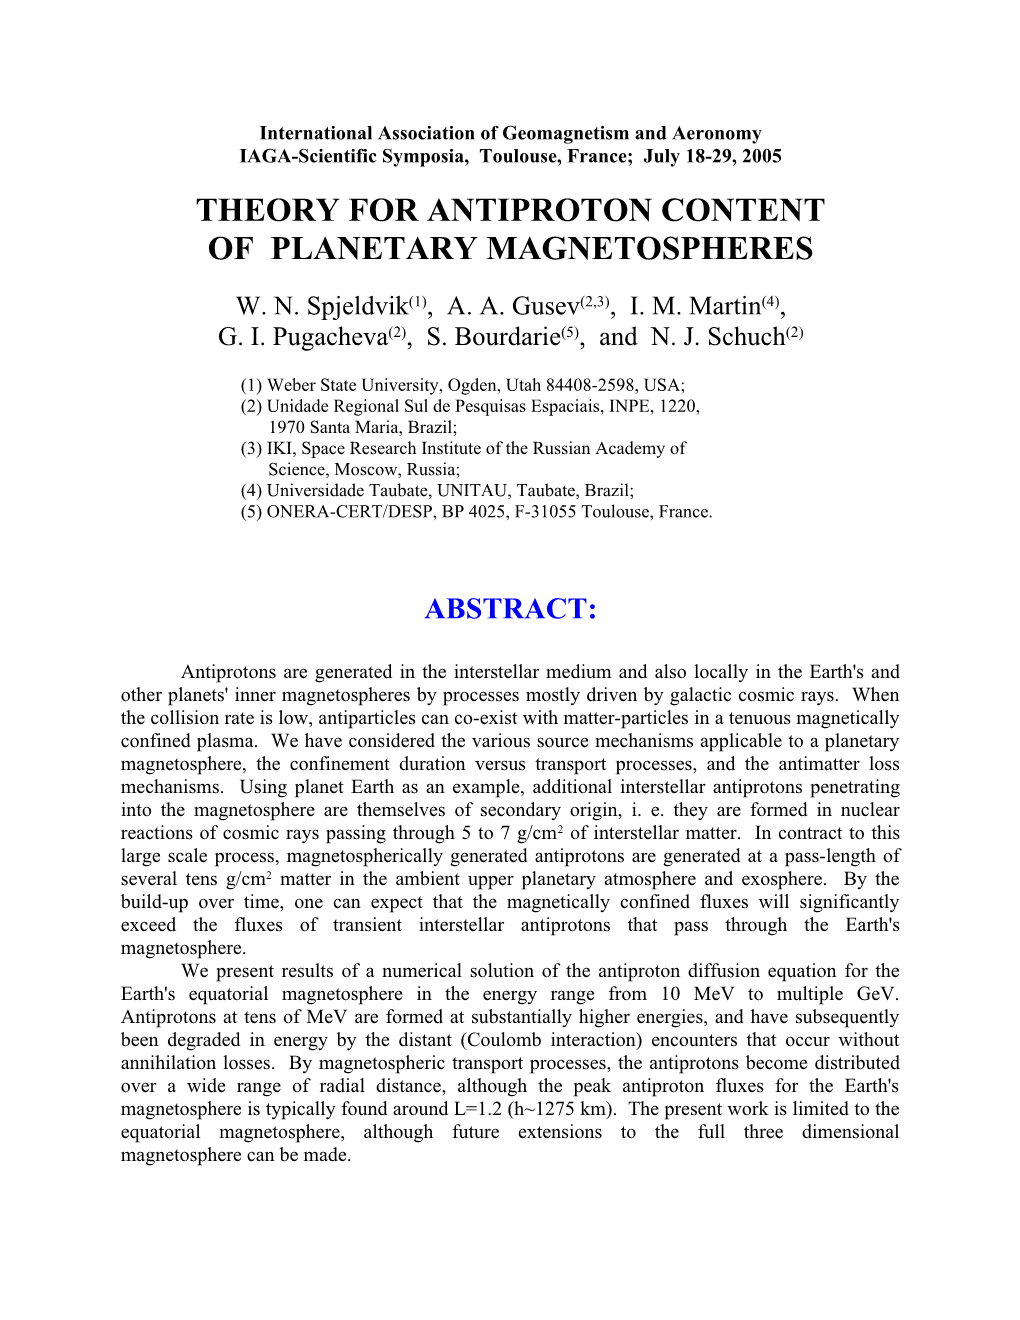 ABSTRACT at Present Time, the Results of All Measurements of the Interstellar Antiproton